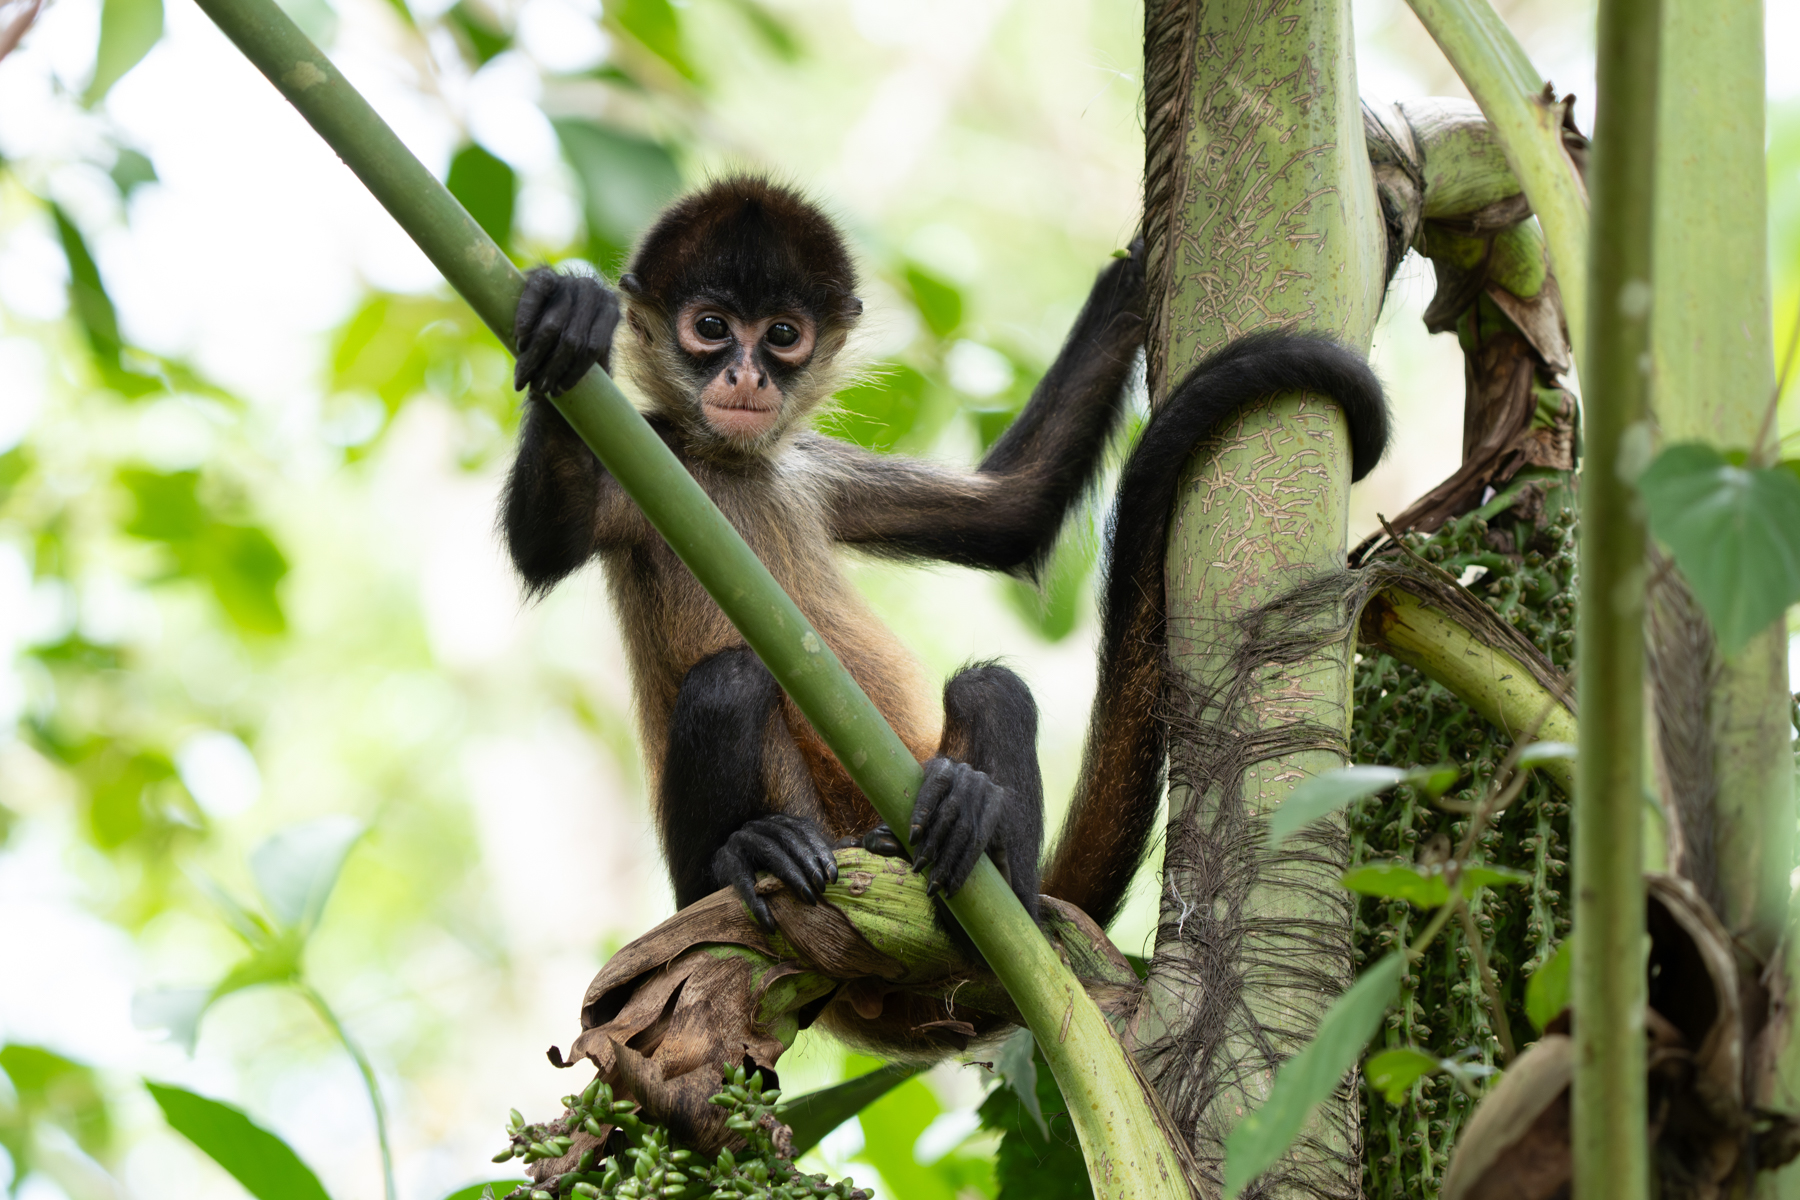 A bold Geoffroy's Spider Monkey perched on a palm seed cluster (image by Inger Vandyke)